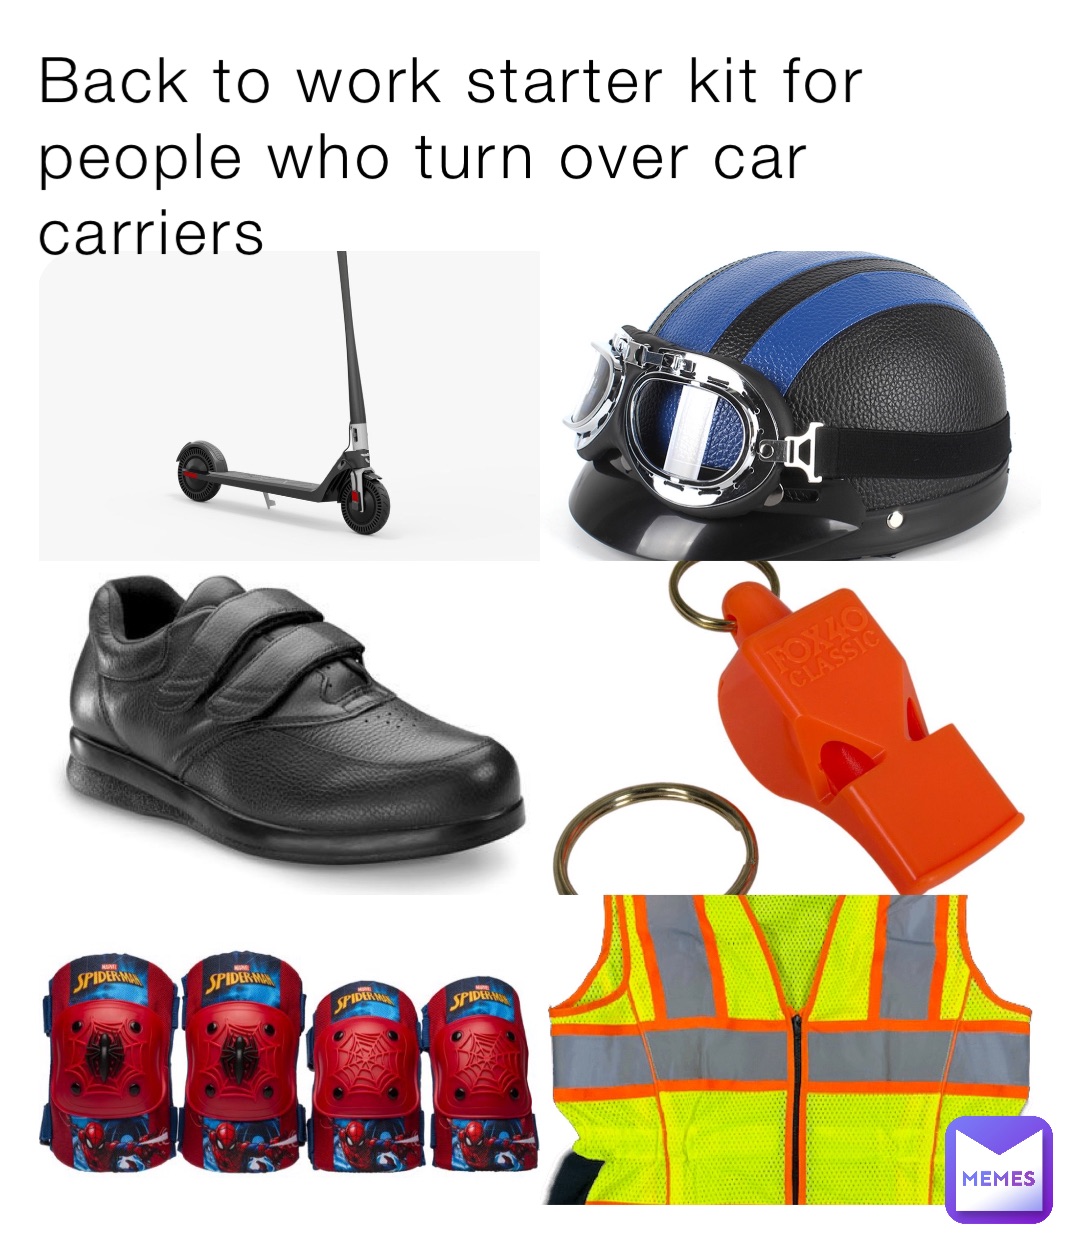 Back to work starter kit for people who turn over car carriers